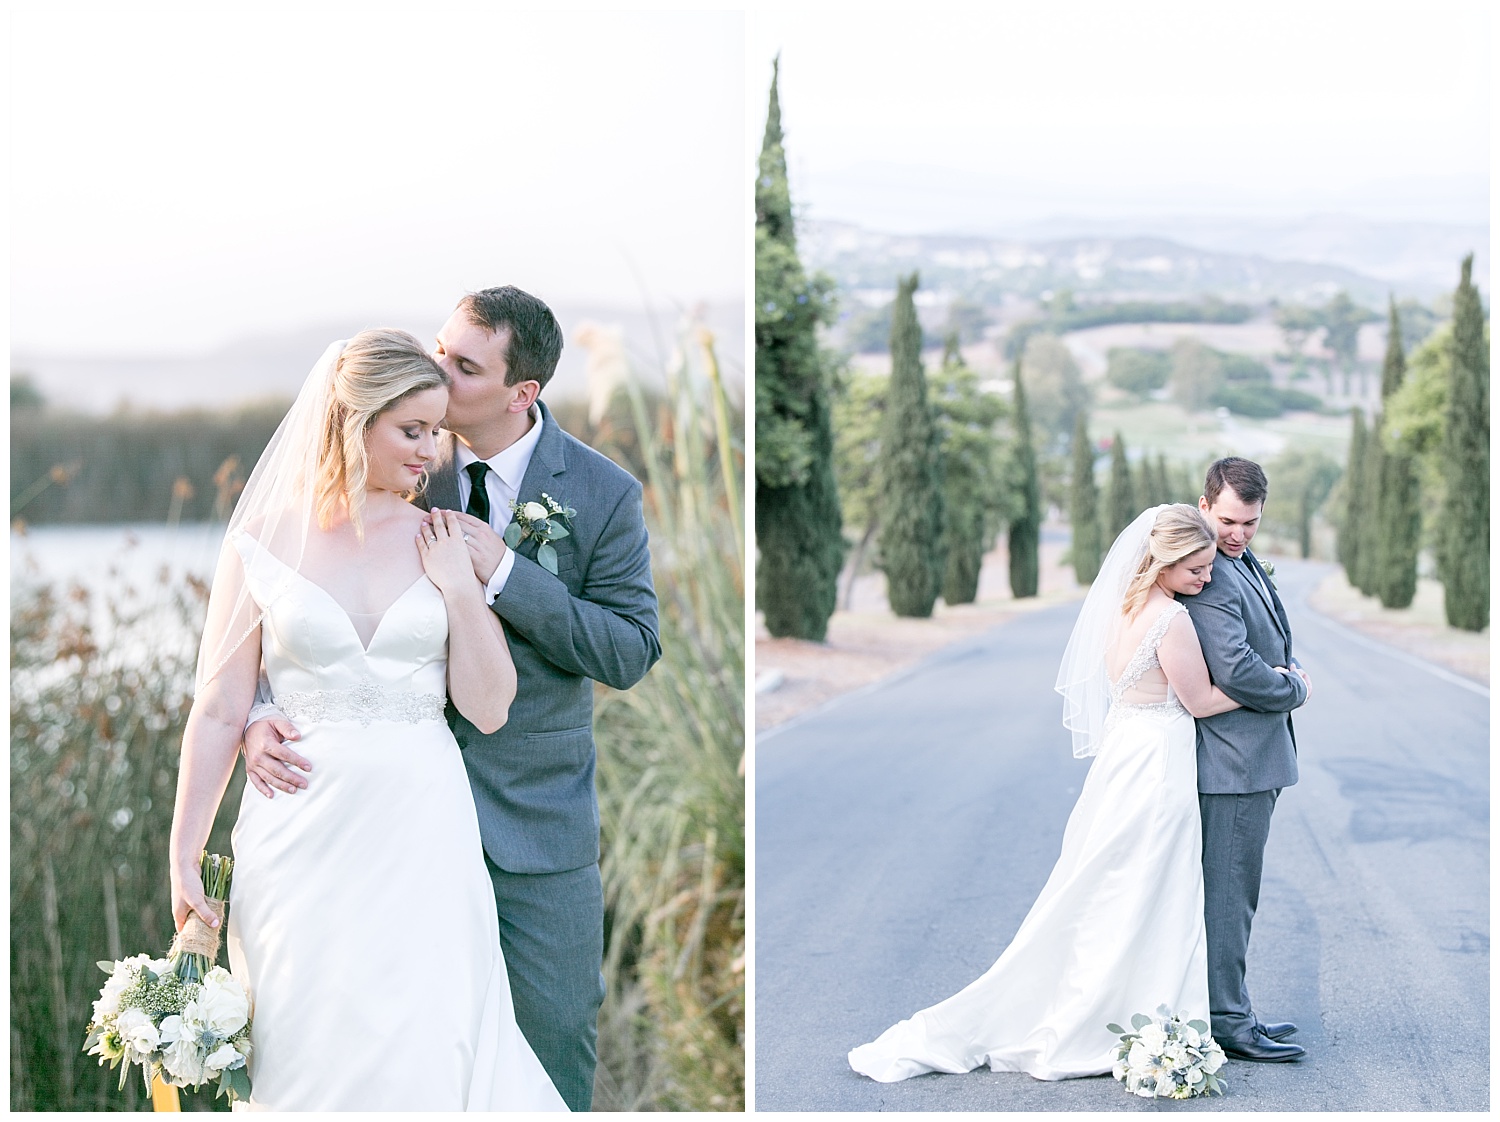 catherine + tim - bella collina golf course - san clemente california - wedding party - bride and groom couples portraits-0220